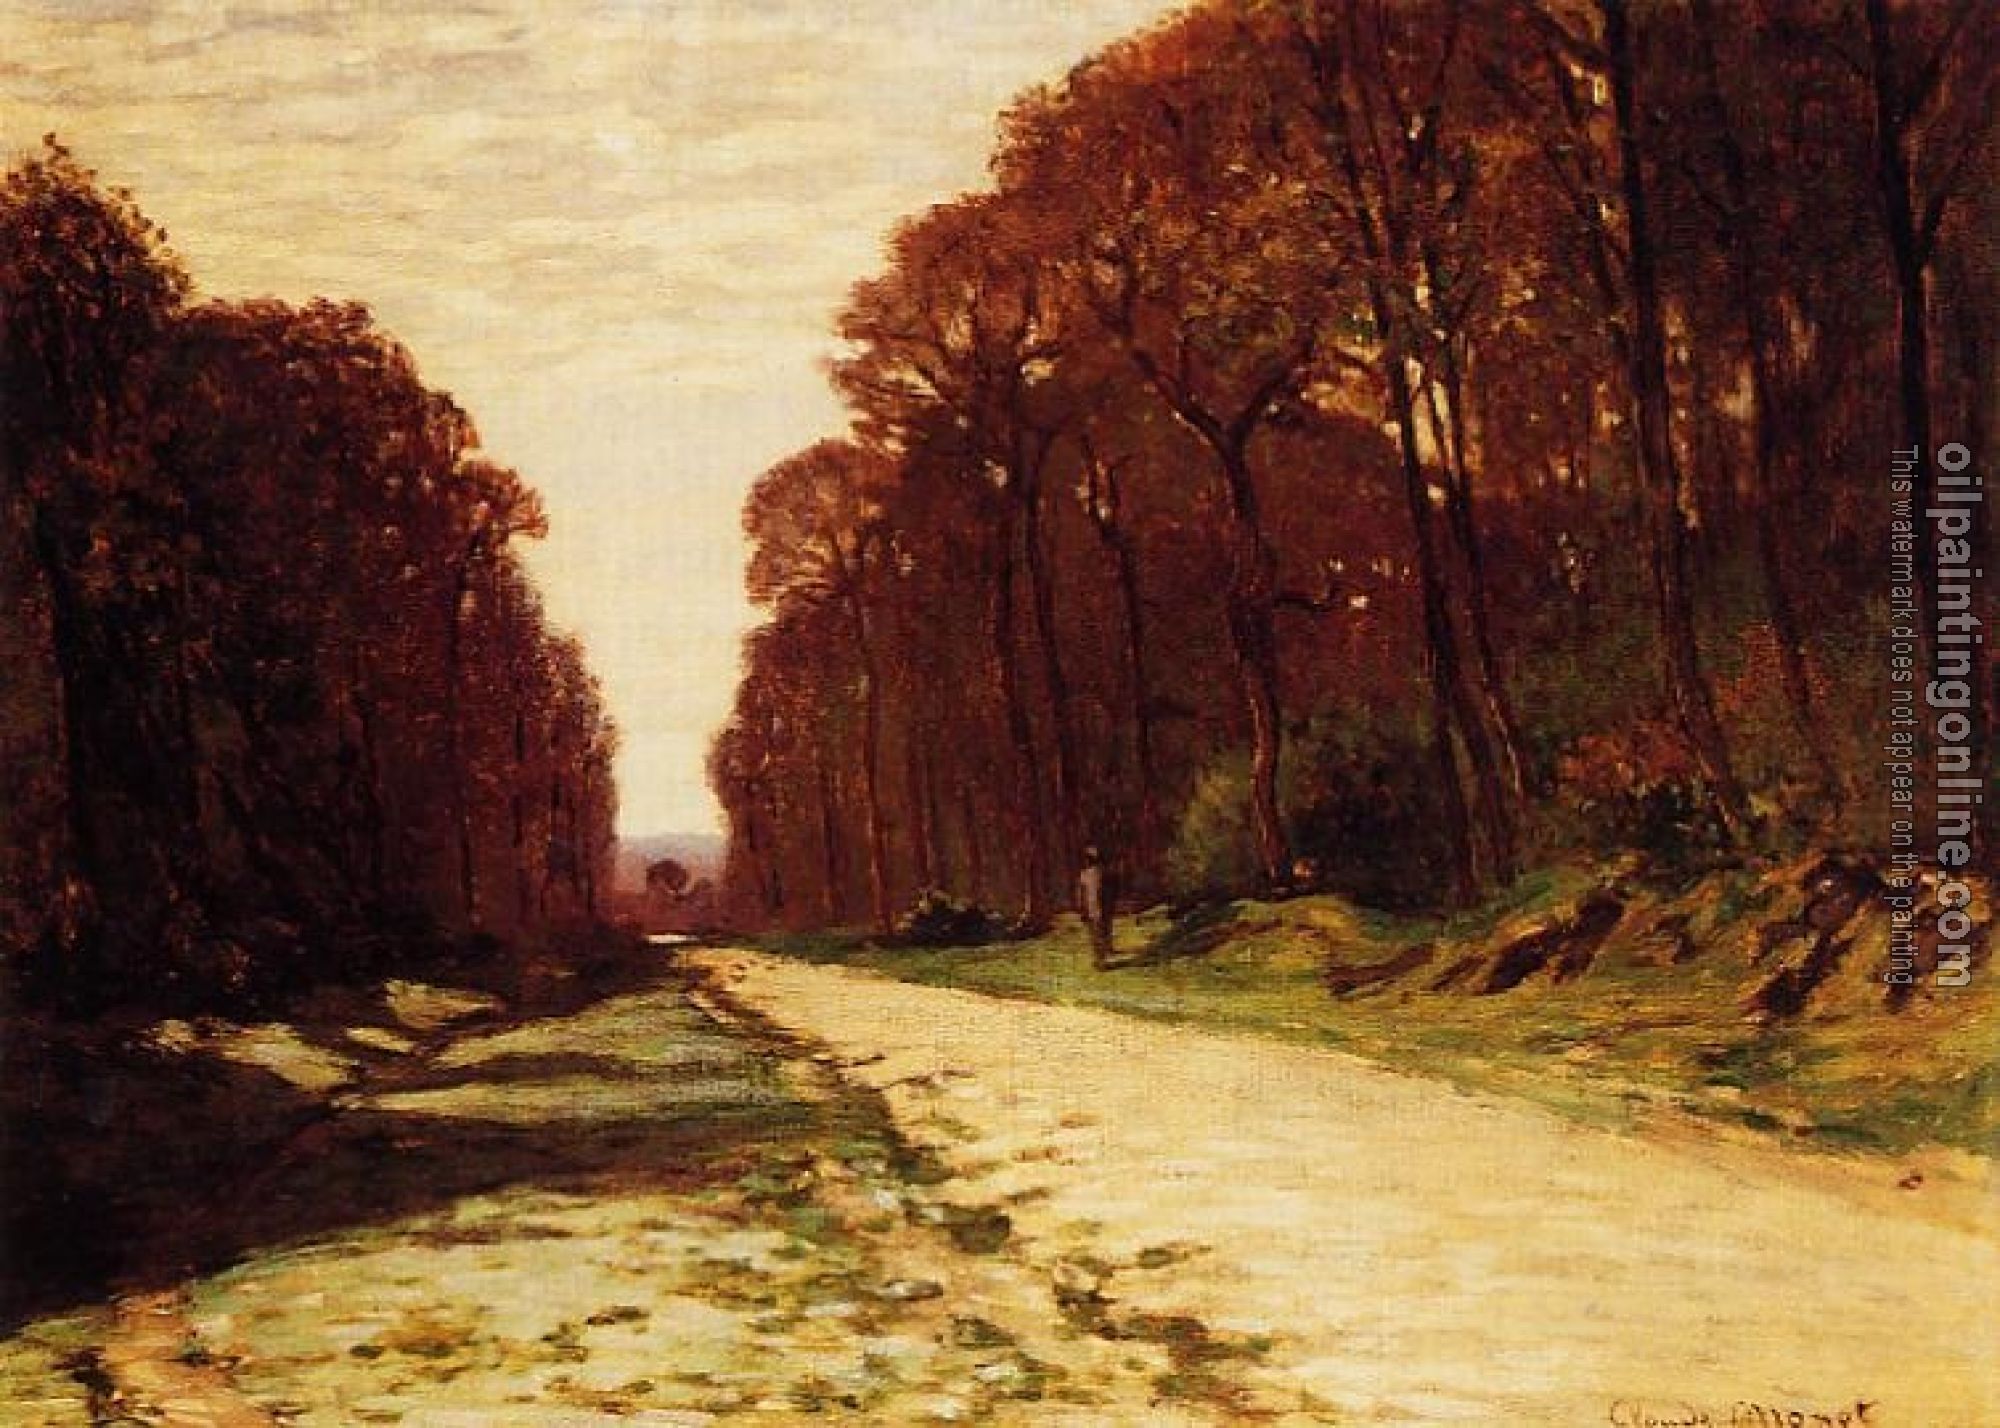 Monet, Claude Oscar - Road in a Forest